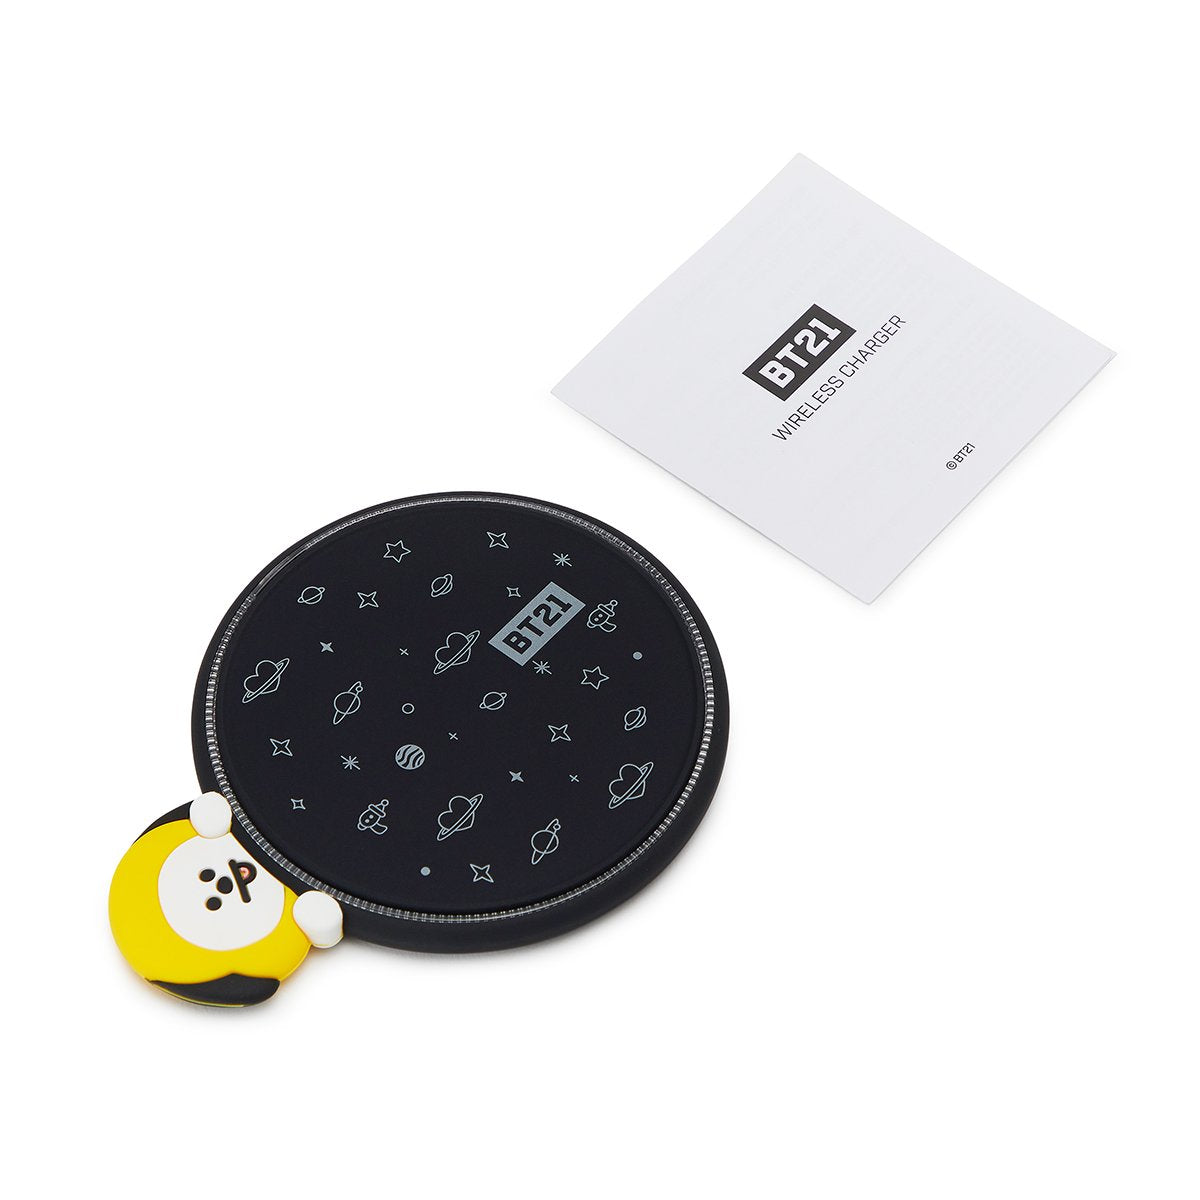 BT21 CHIMMY Wireless QI Phone Charger Pad